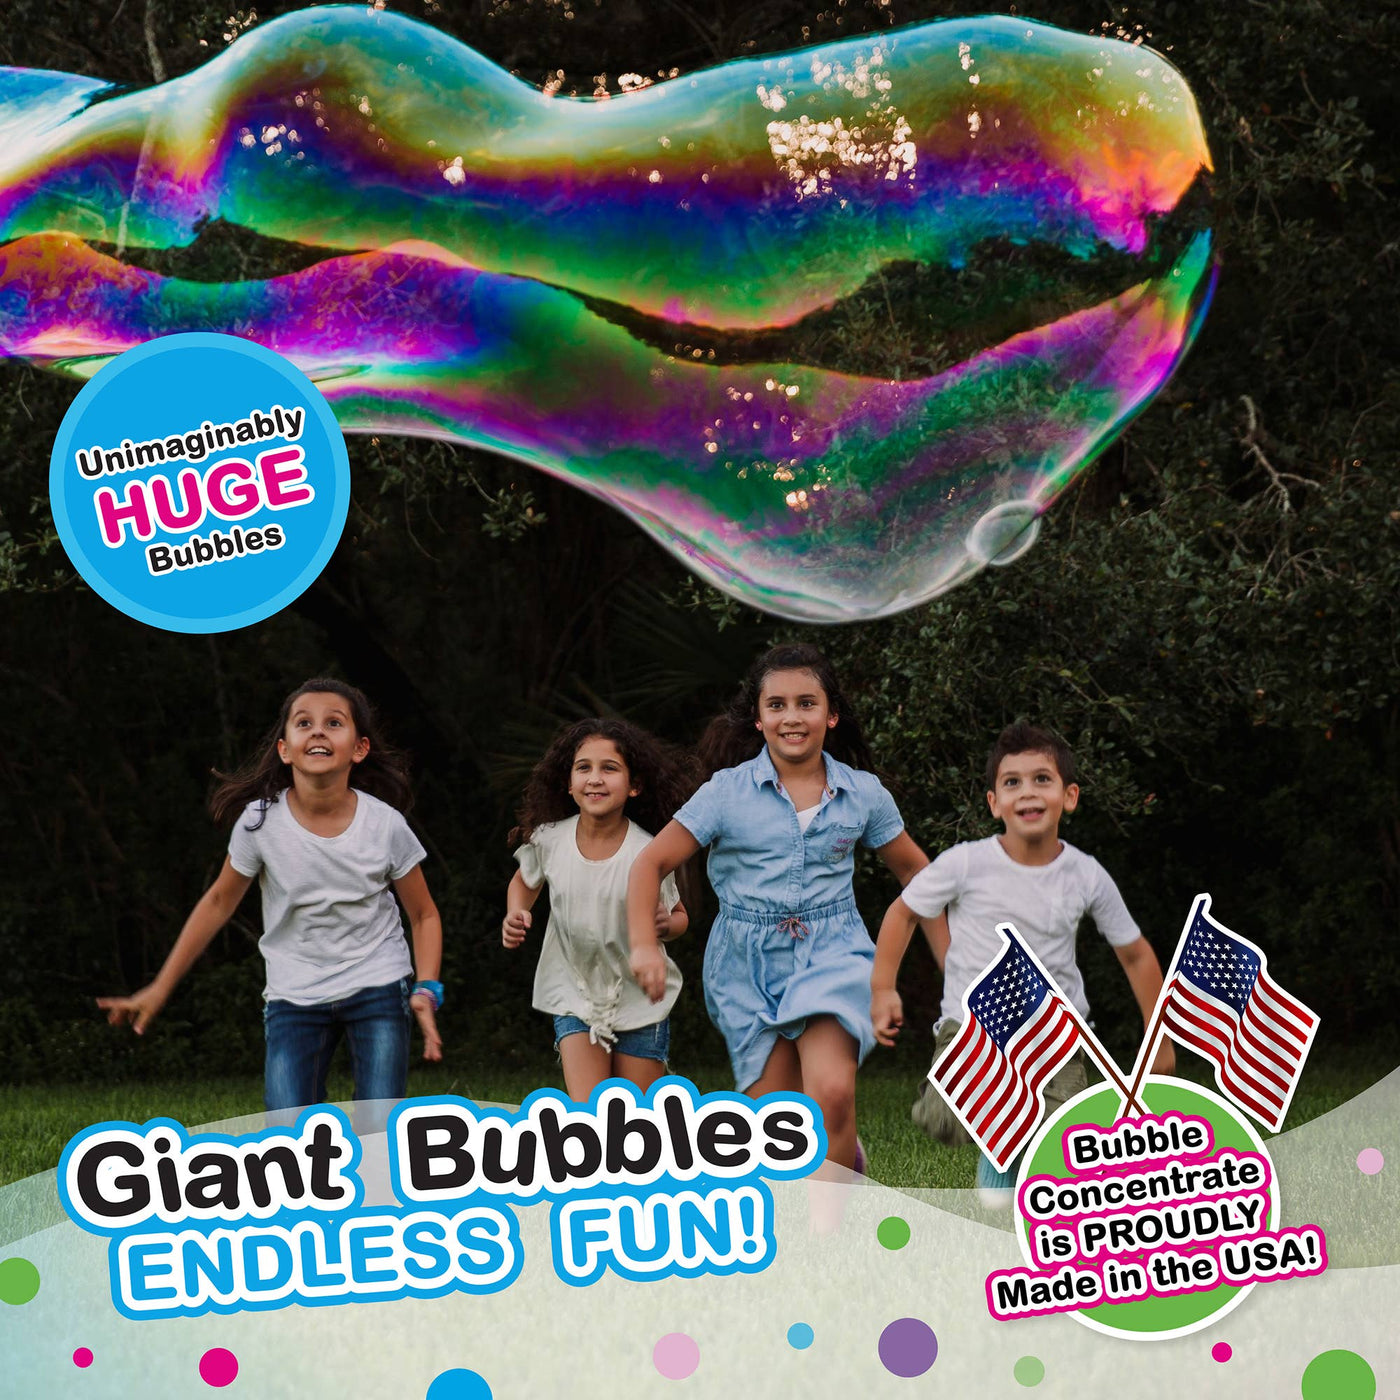 Big Bubble Wands & Concentrate!